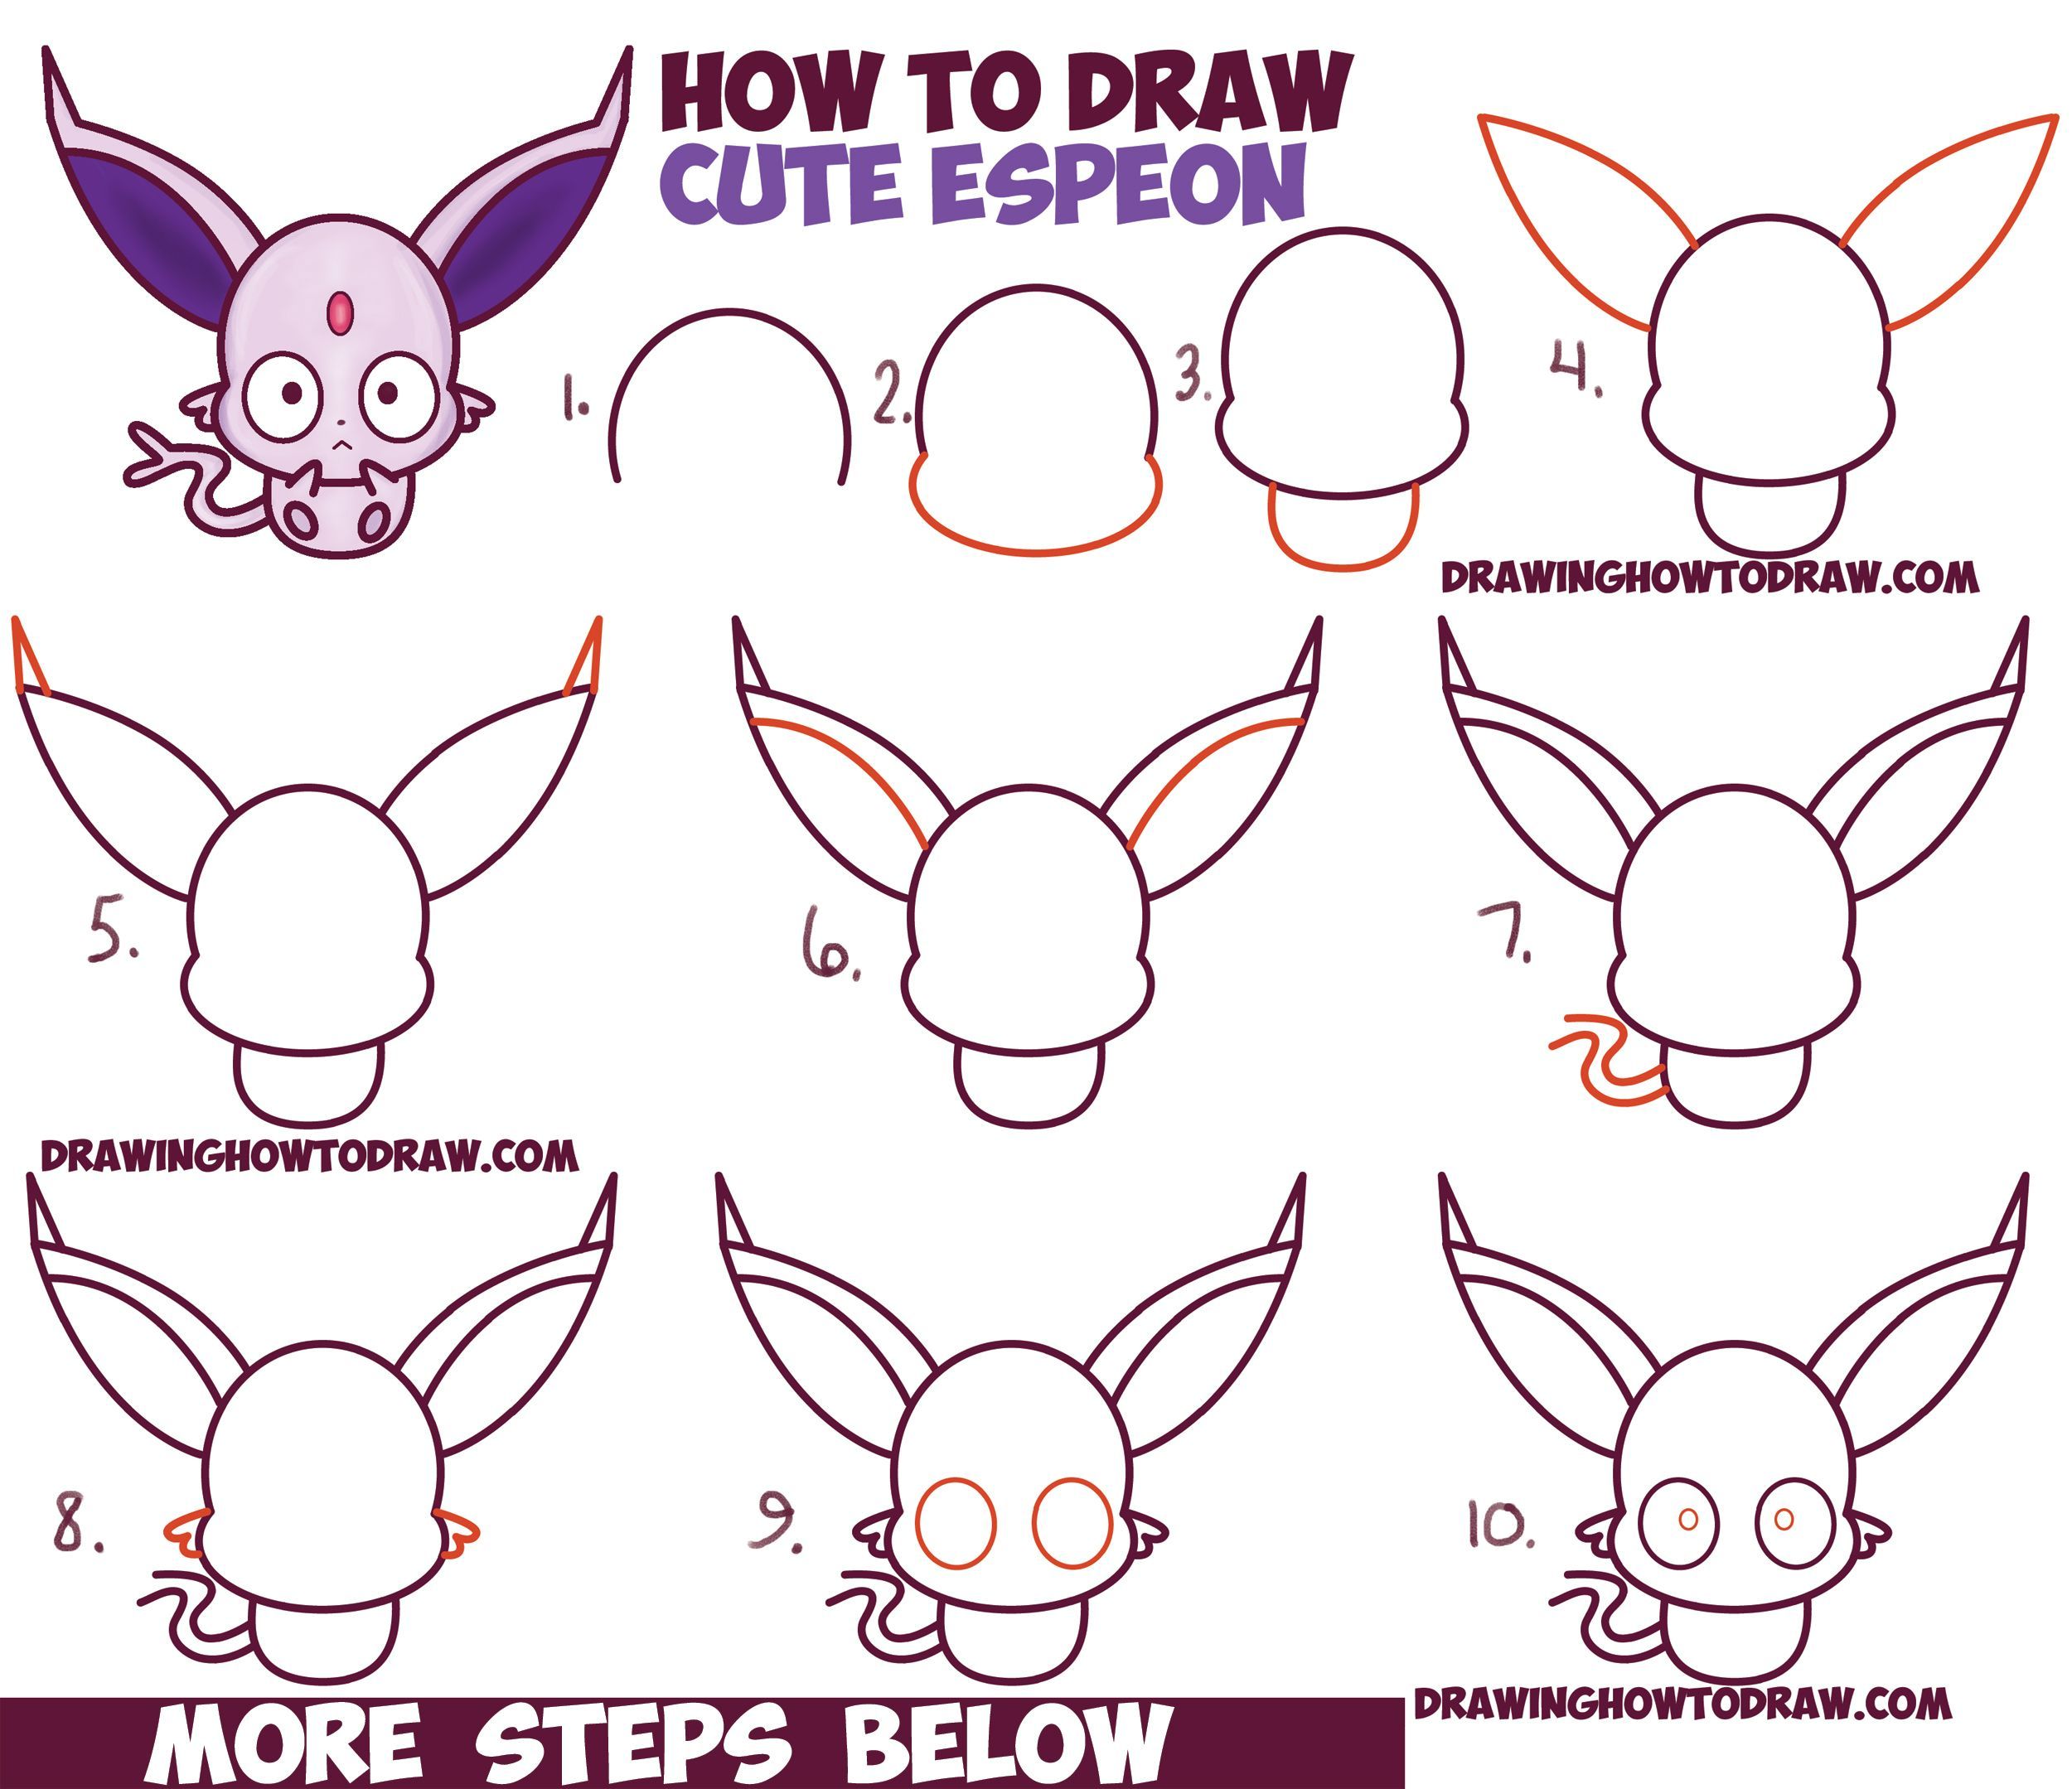 How to Draw Cute Kawaii / Chibi Espeon from Pokemon Easy Step by Step ...